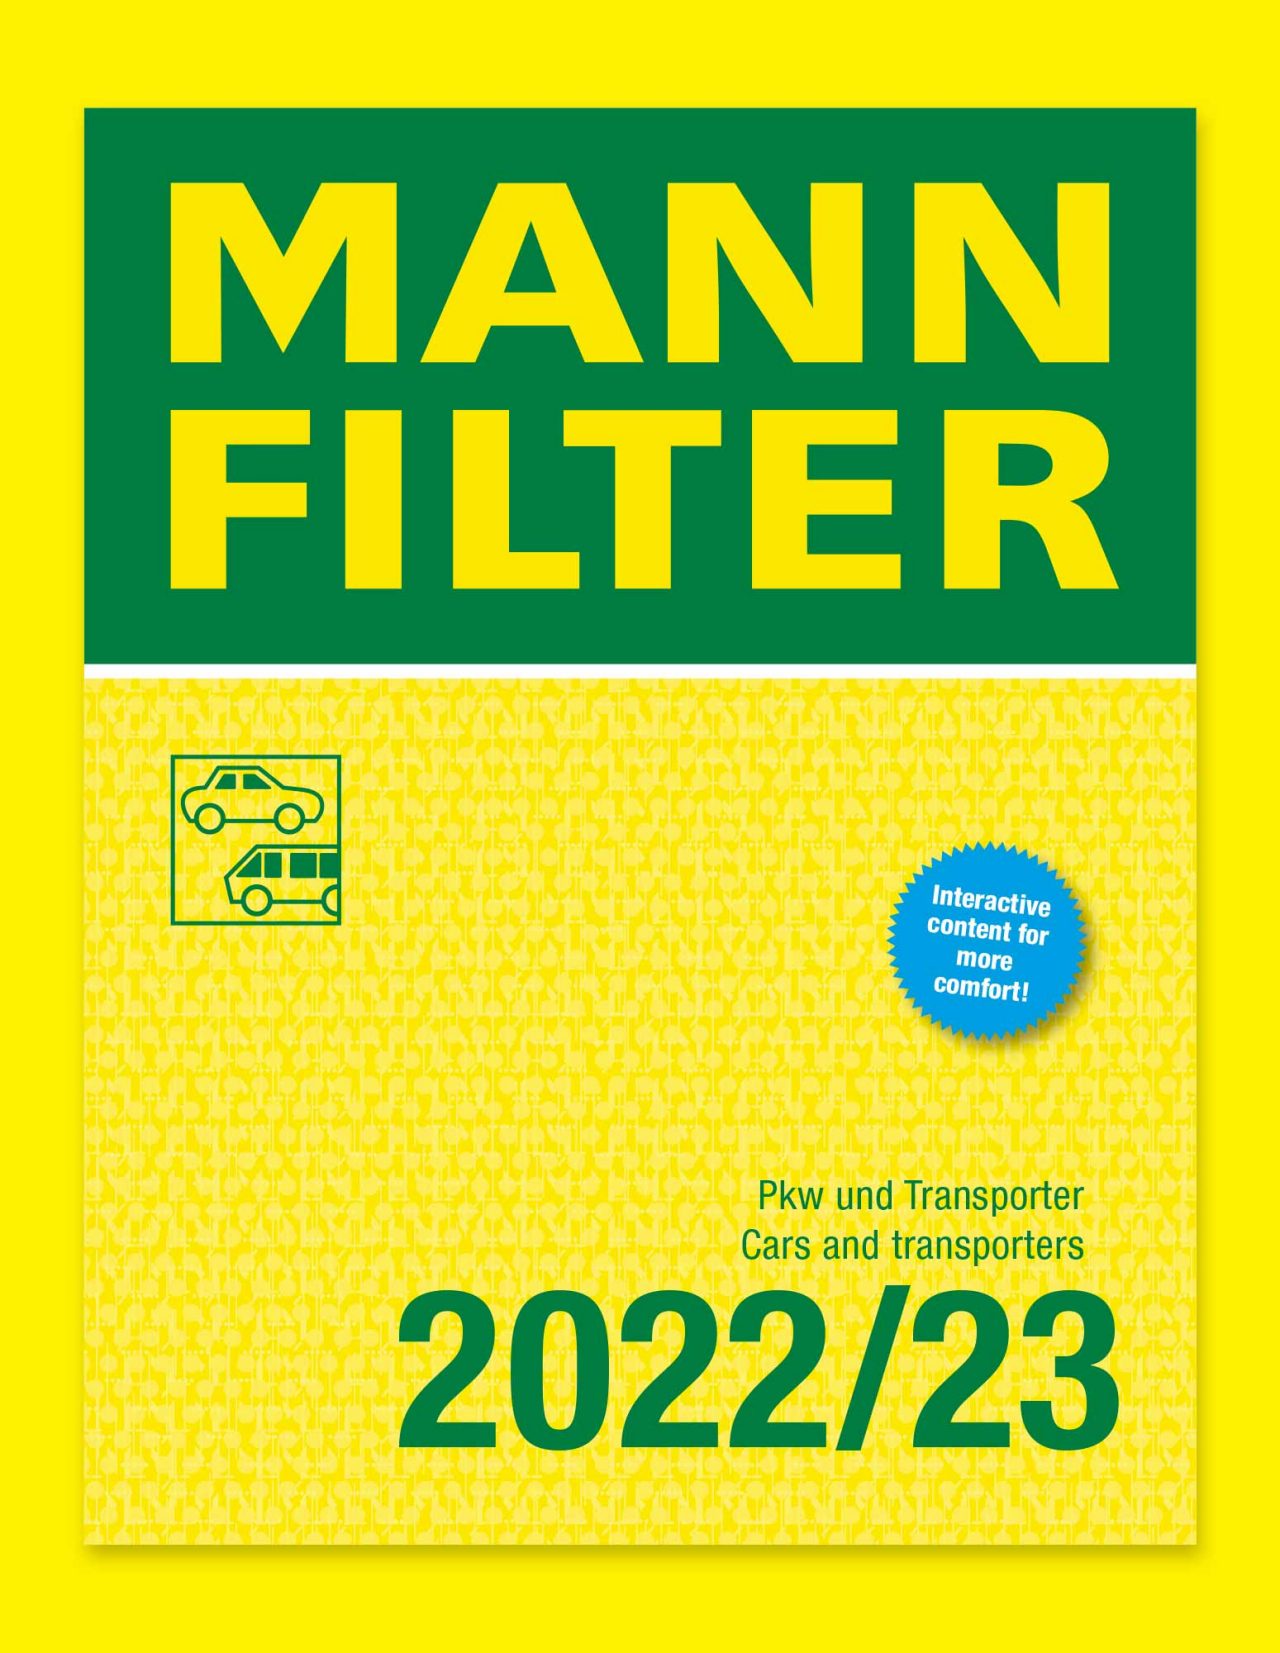 MANN-FILTER catalog for cars and transporters